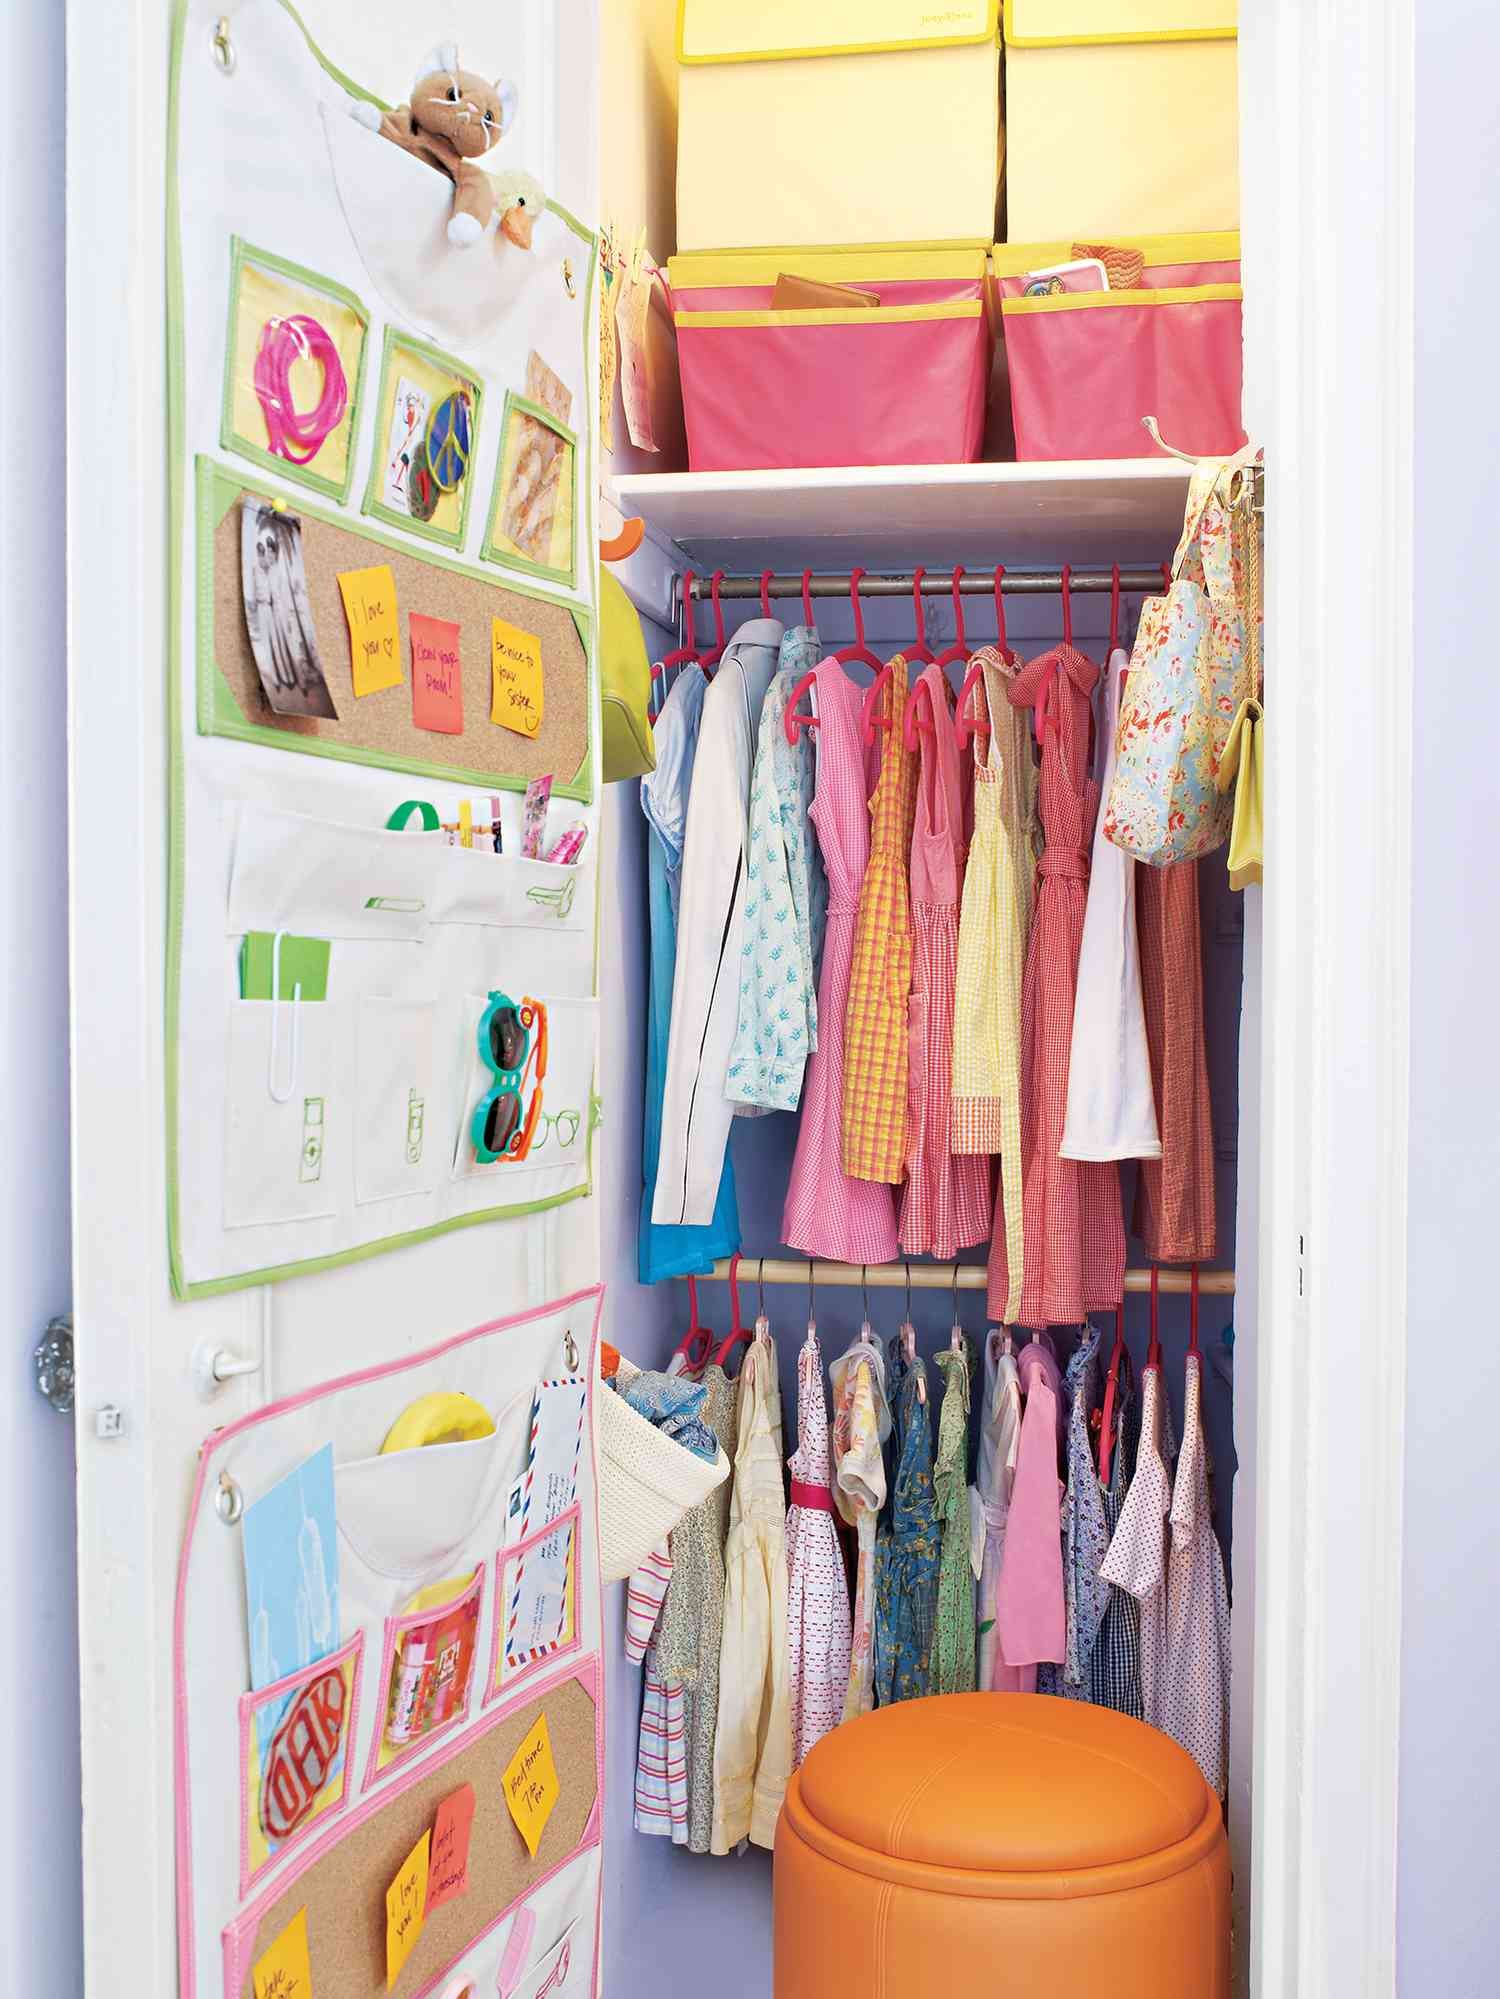 7 Kids Closet Organizing Ideas To Try Intended For Baby Clothes Wardrobes (View 10 of 15)